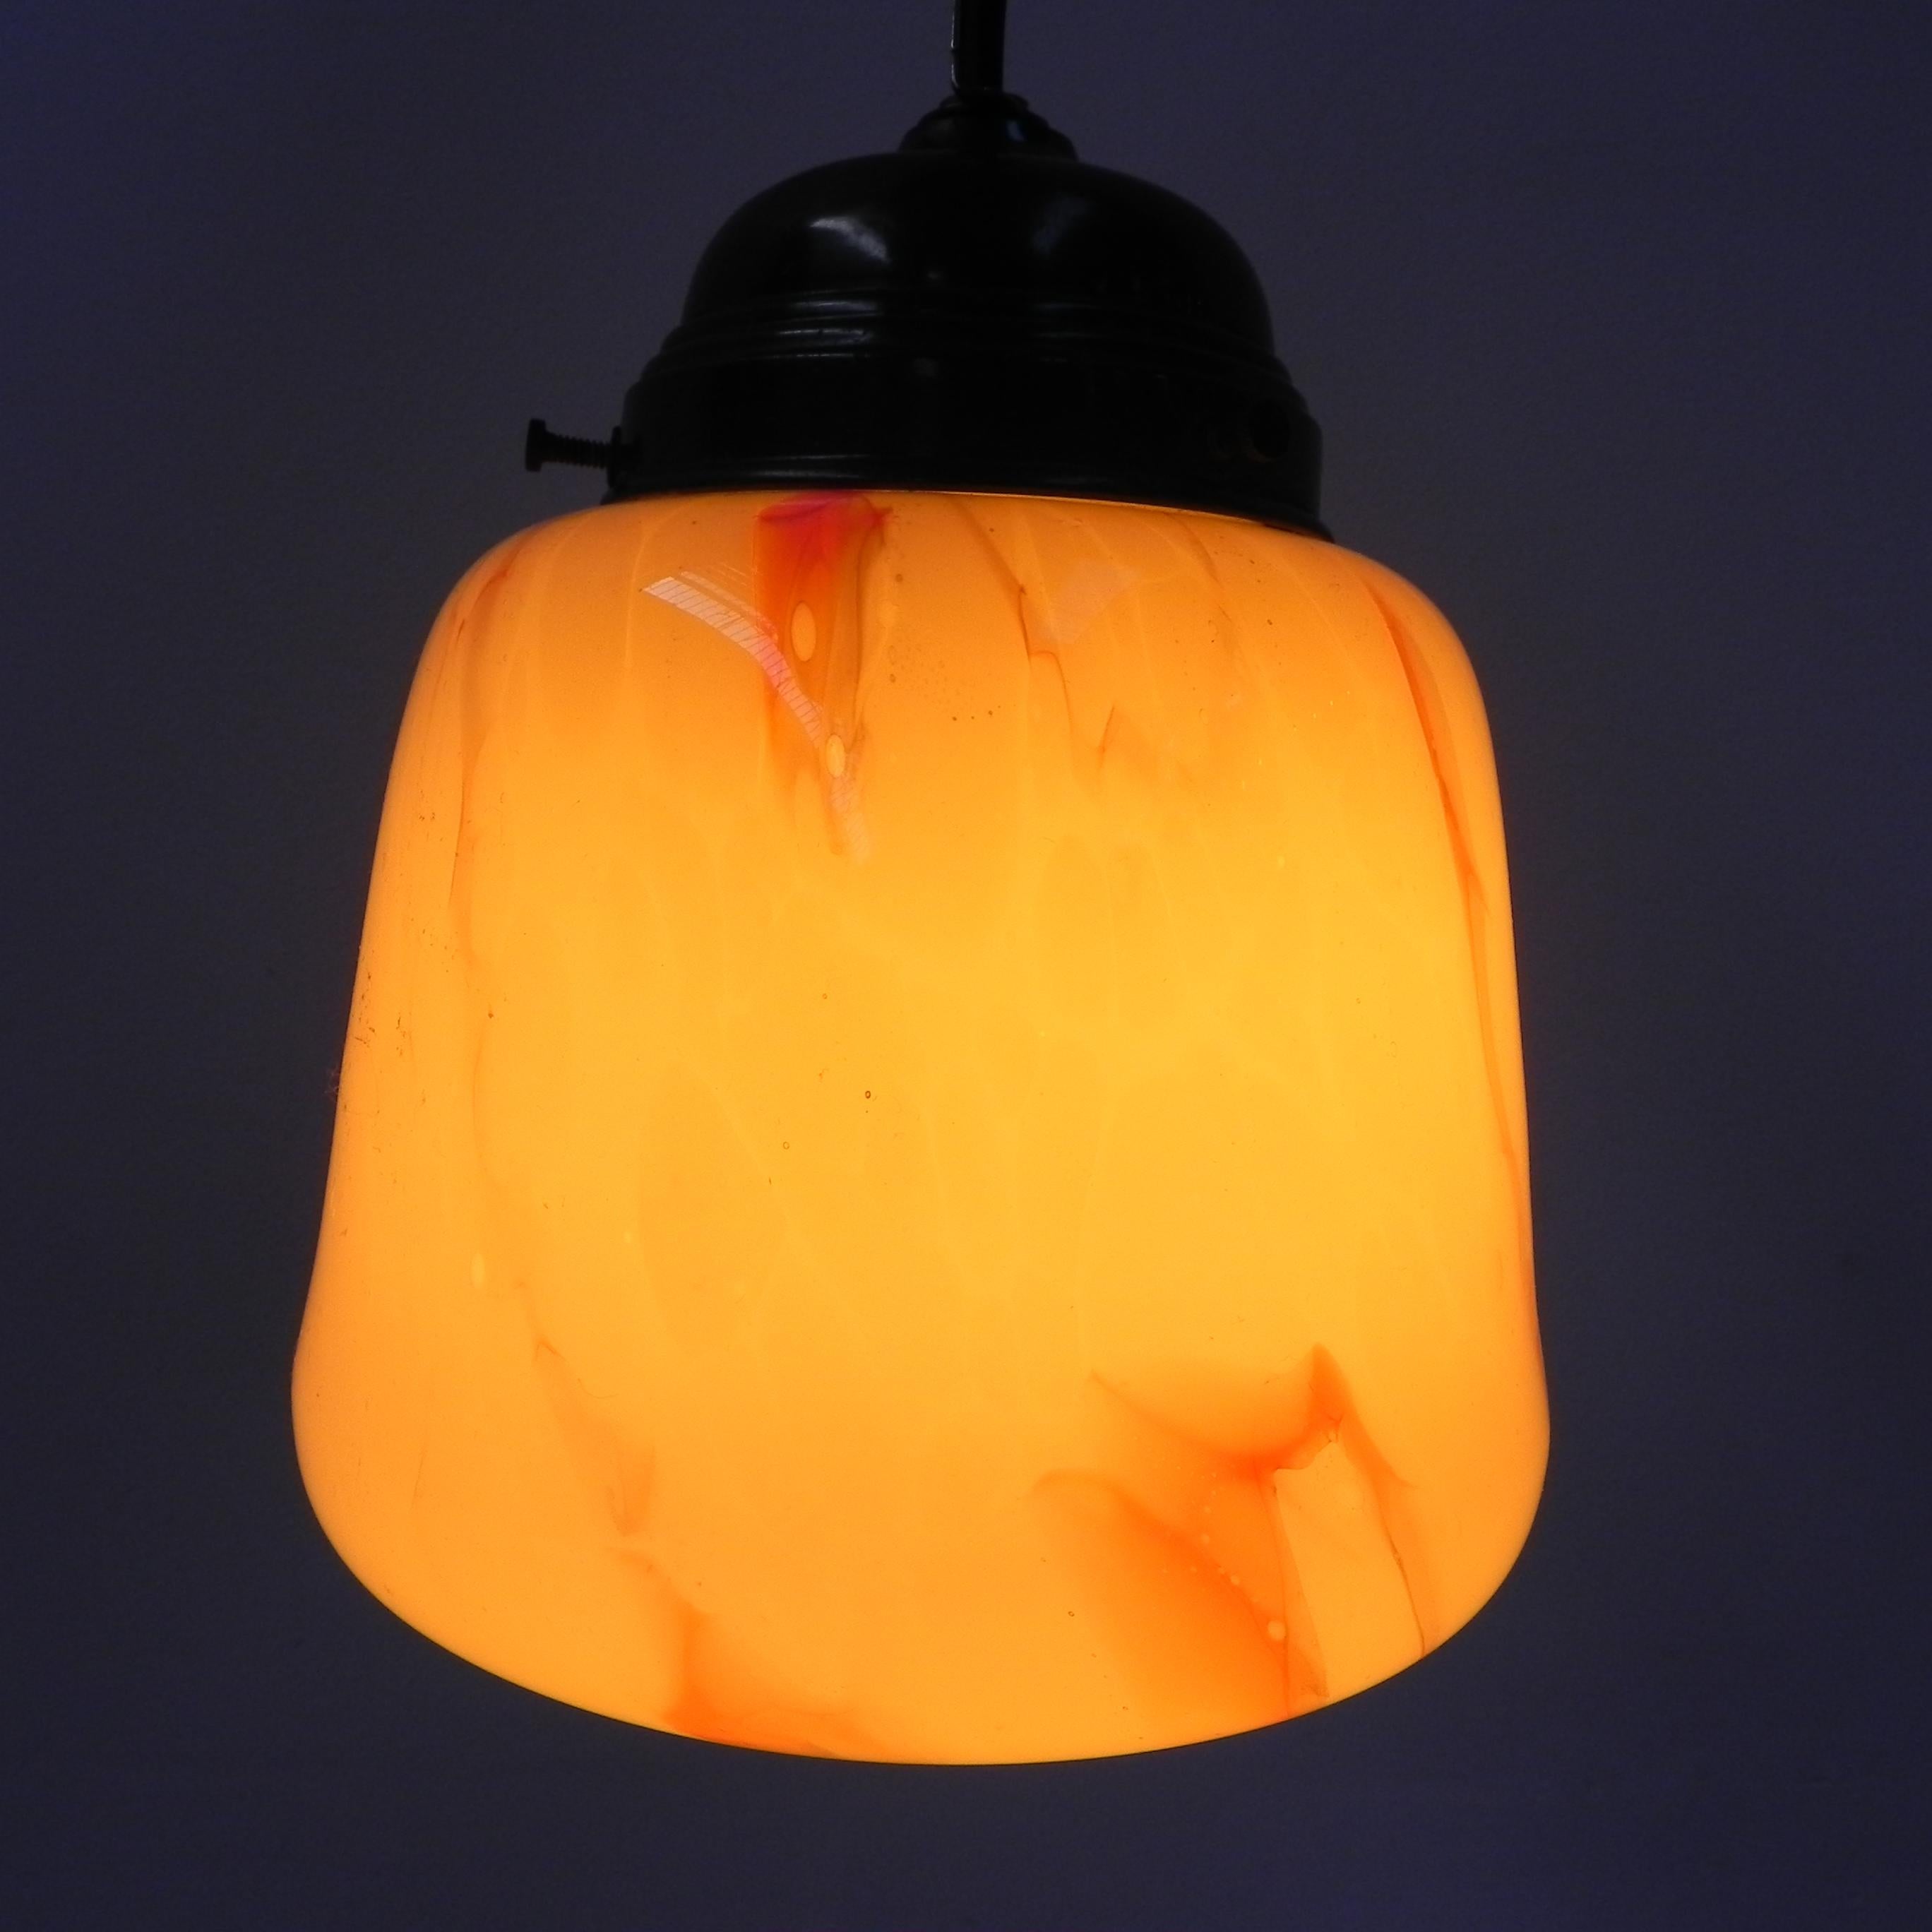 Art Deco hanging lamp with marbled glass shade For Sale 7